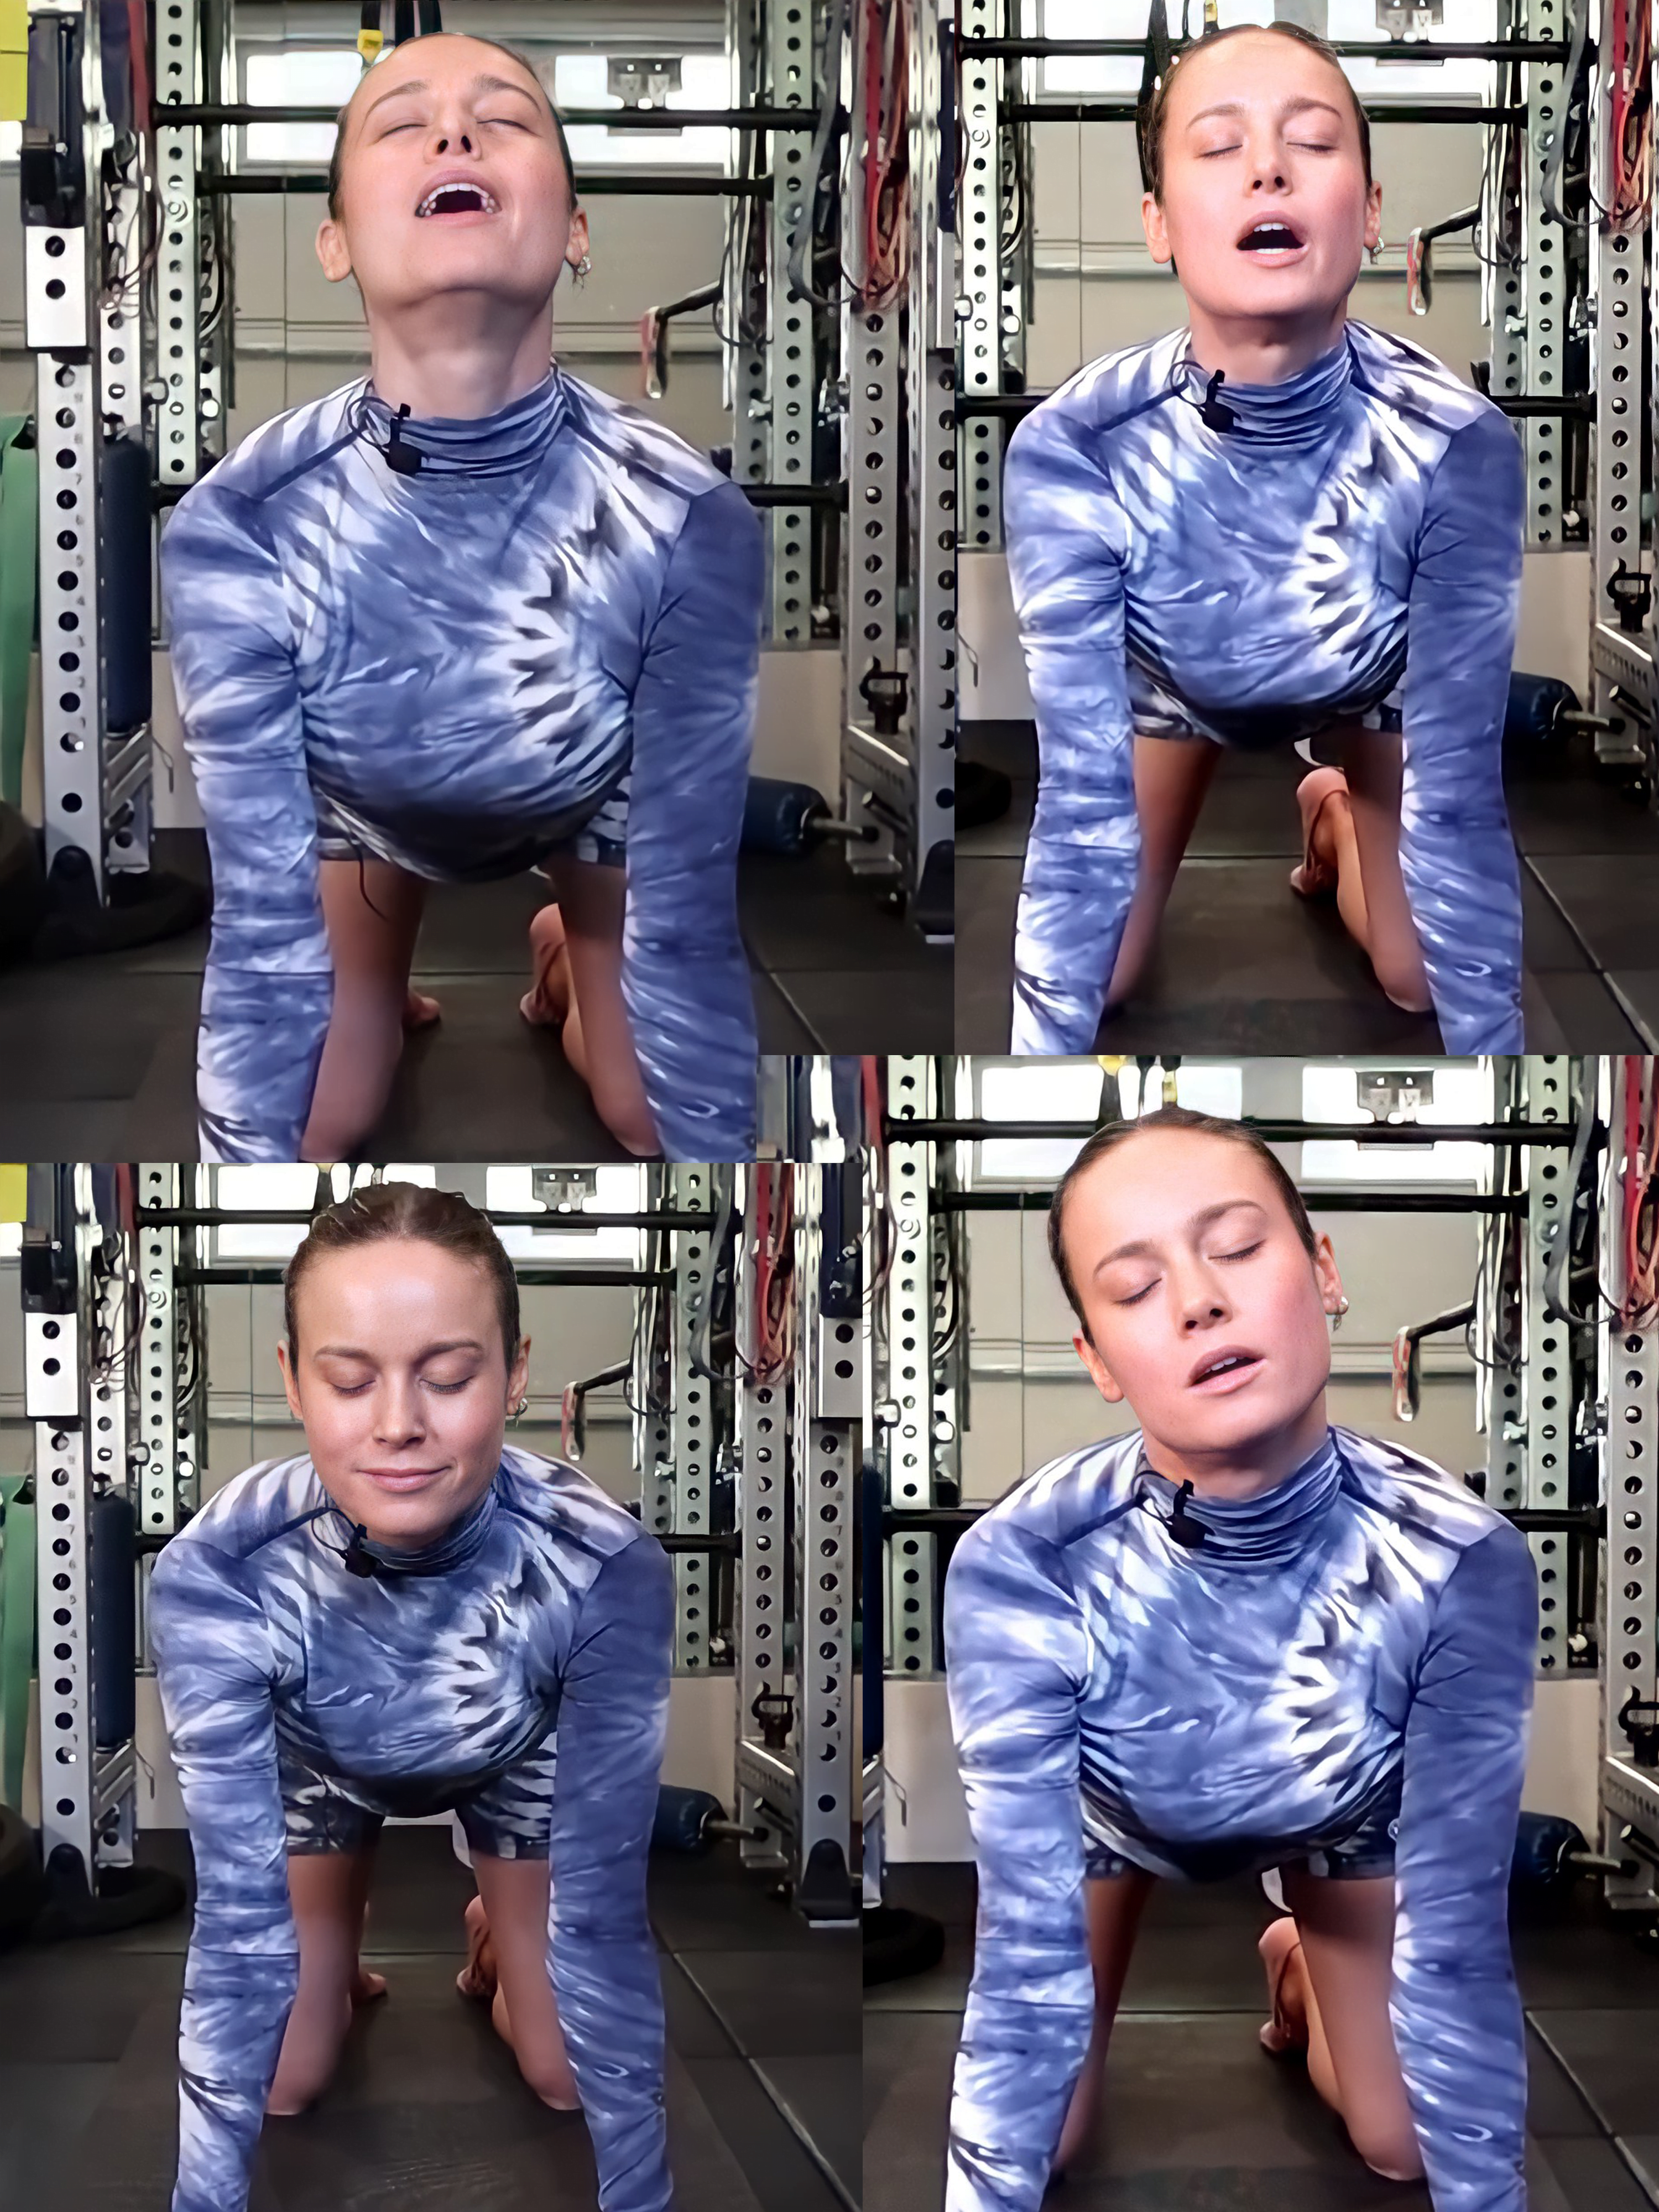 Brie larson surely thinks about her horny fans during workout